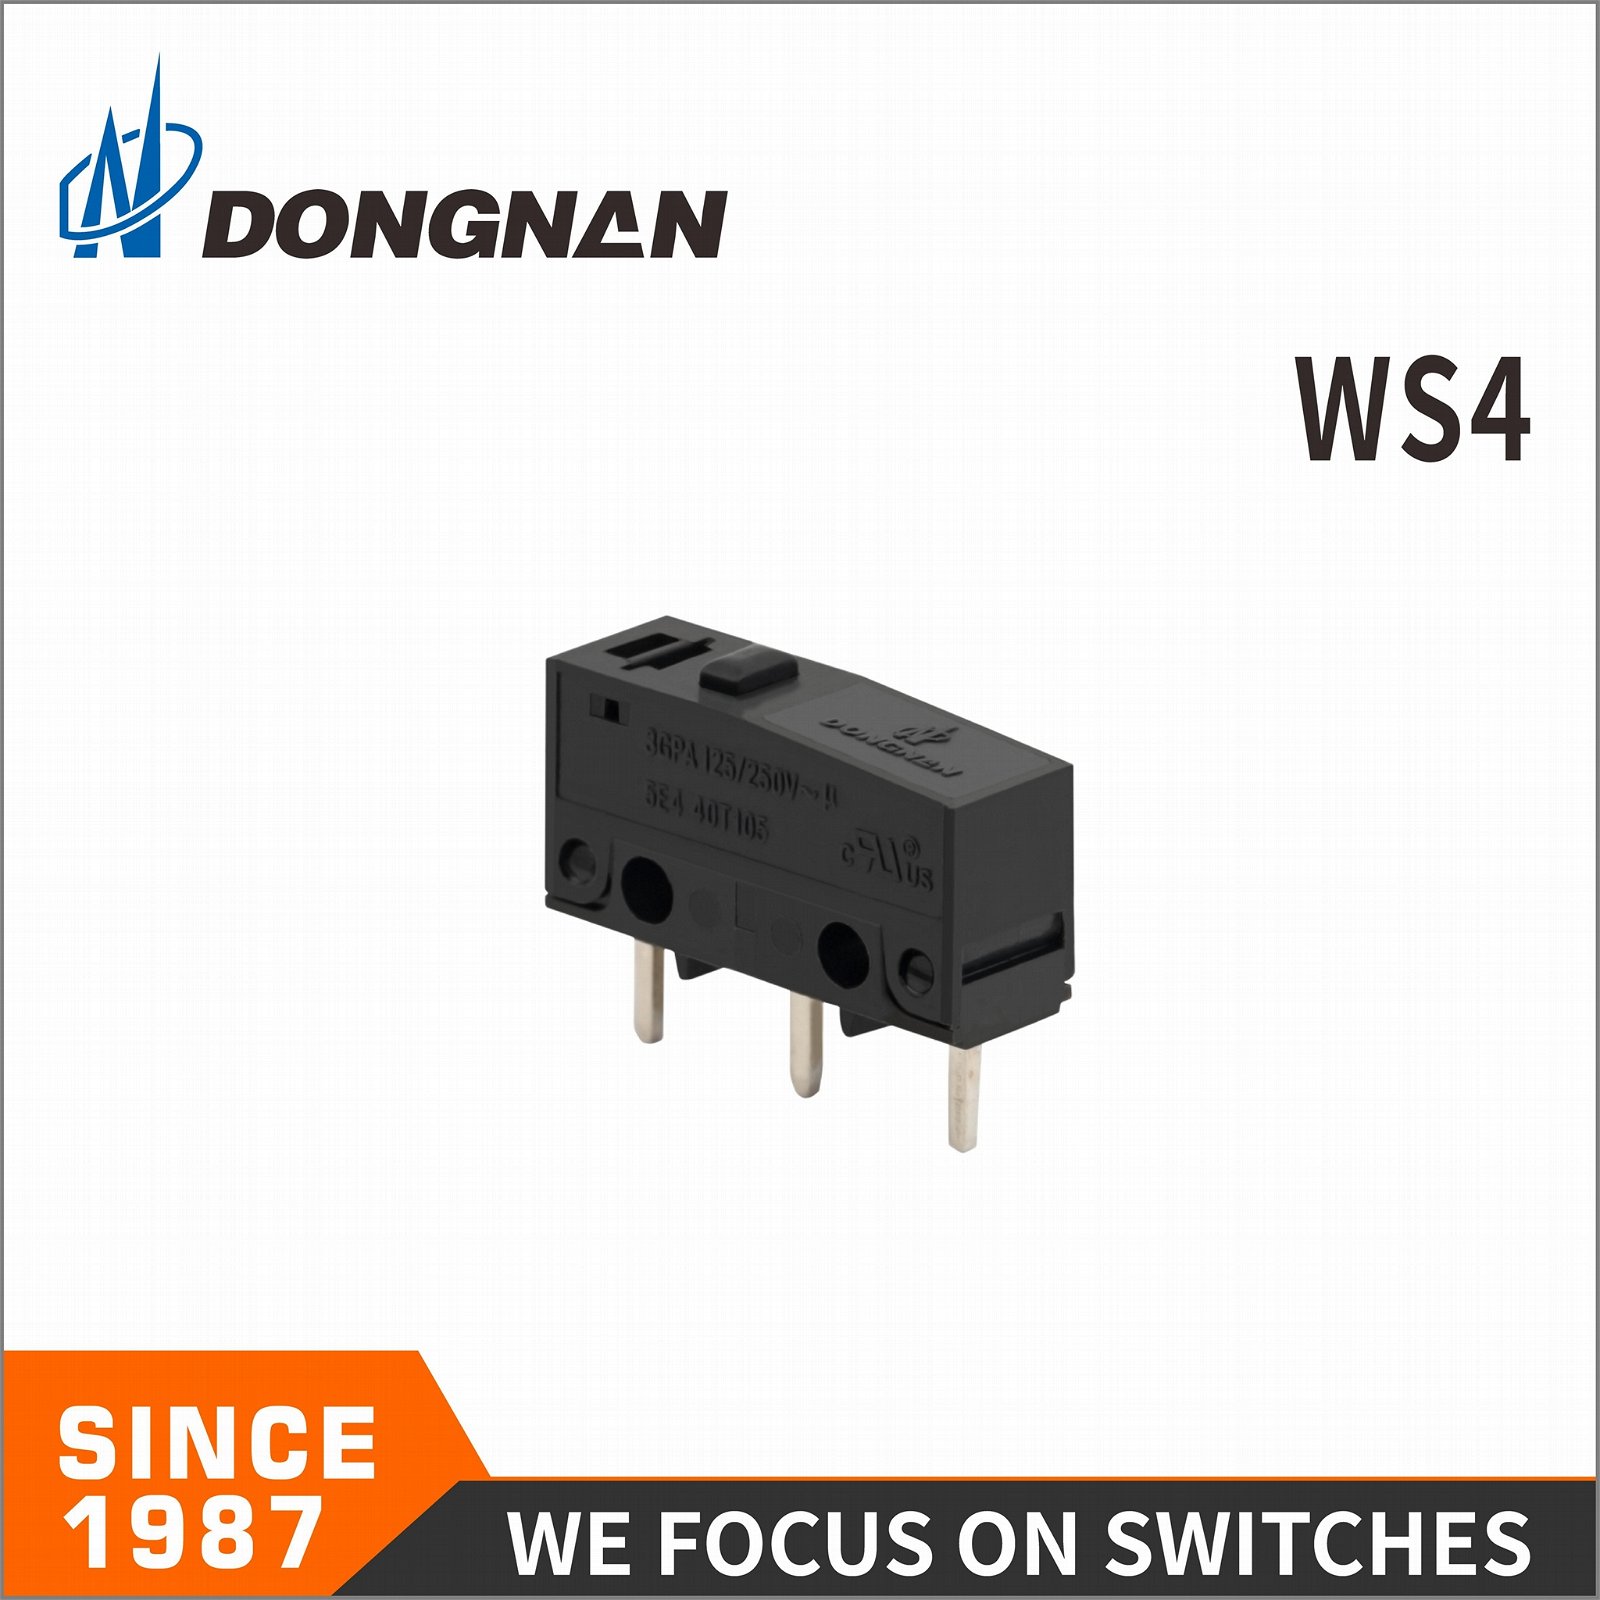 Dongnna WS4 Subminiature Size Waterproof Switch for Car and Home Appliances 2